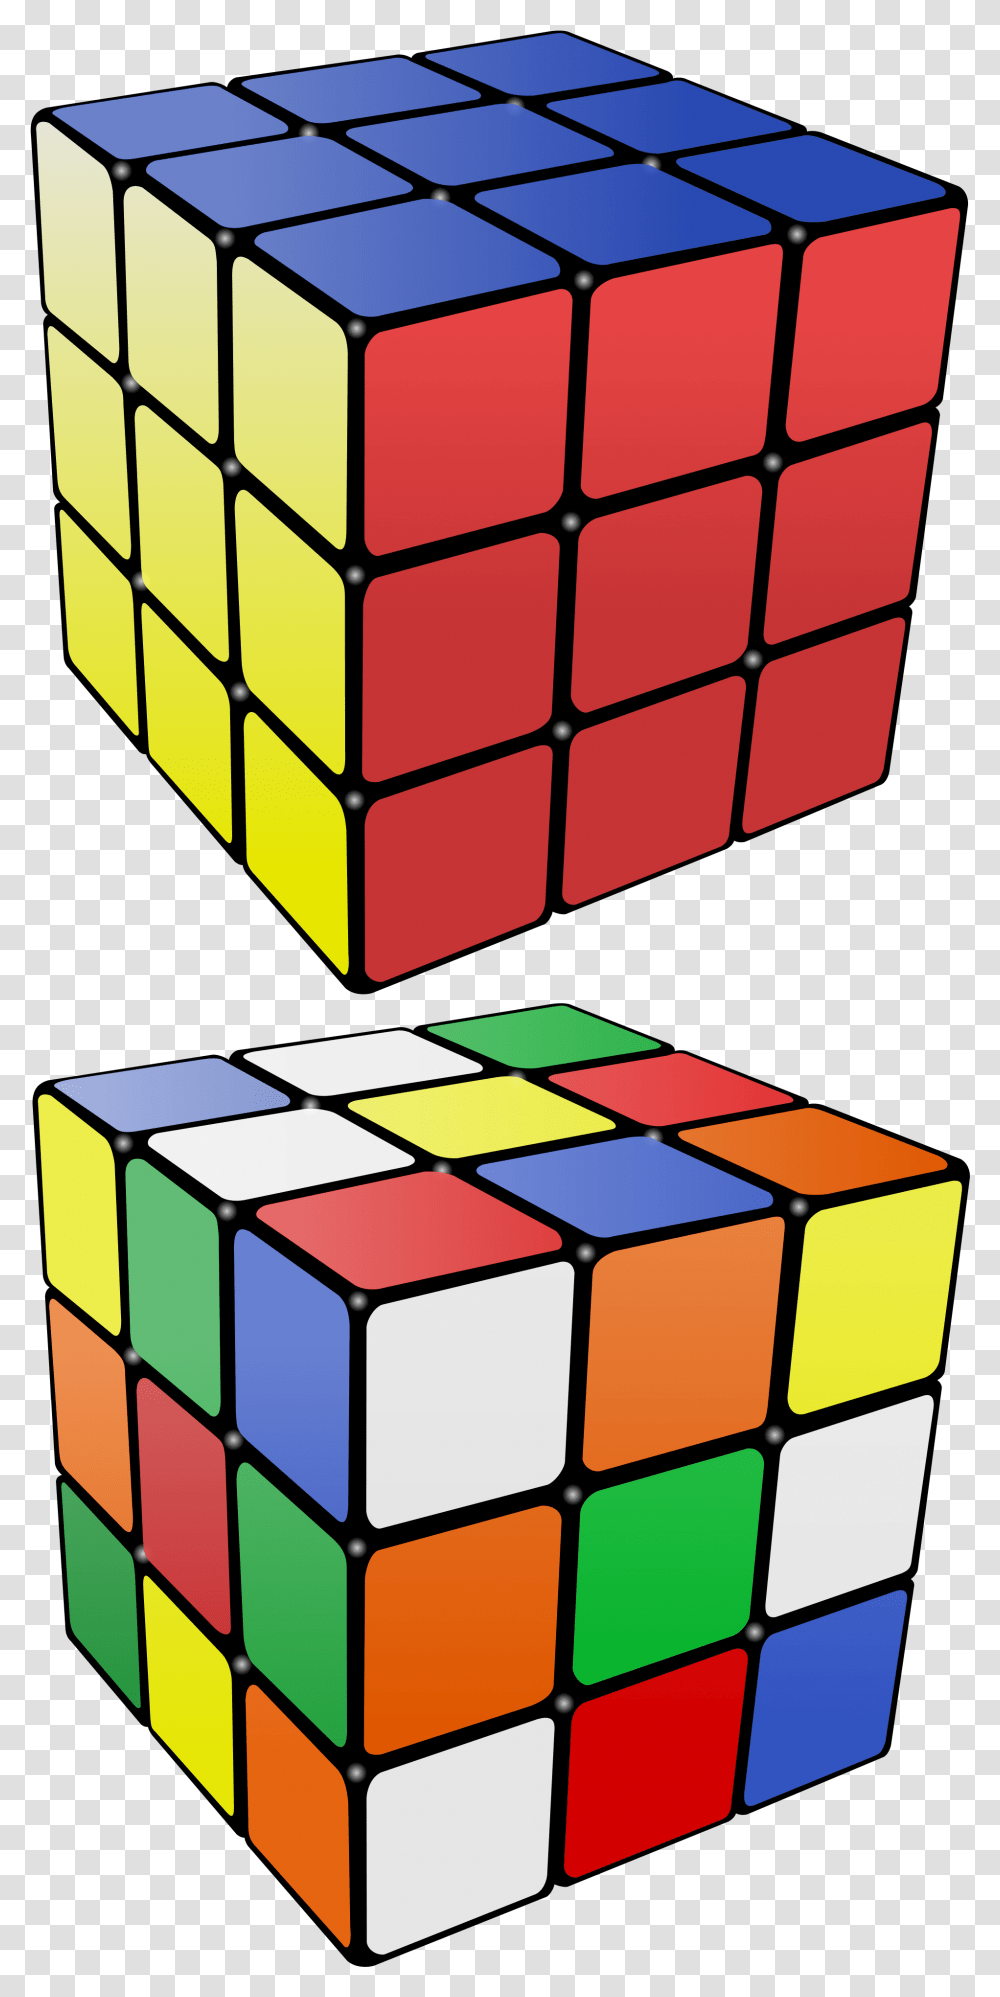 Rubik's Cube Coloring Pages Rubiks Cube, Rubix Cube, Grenade, Bomb, Weapon Transparent Png